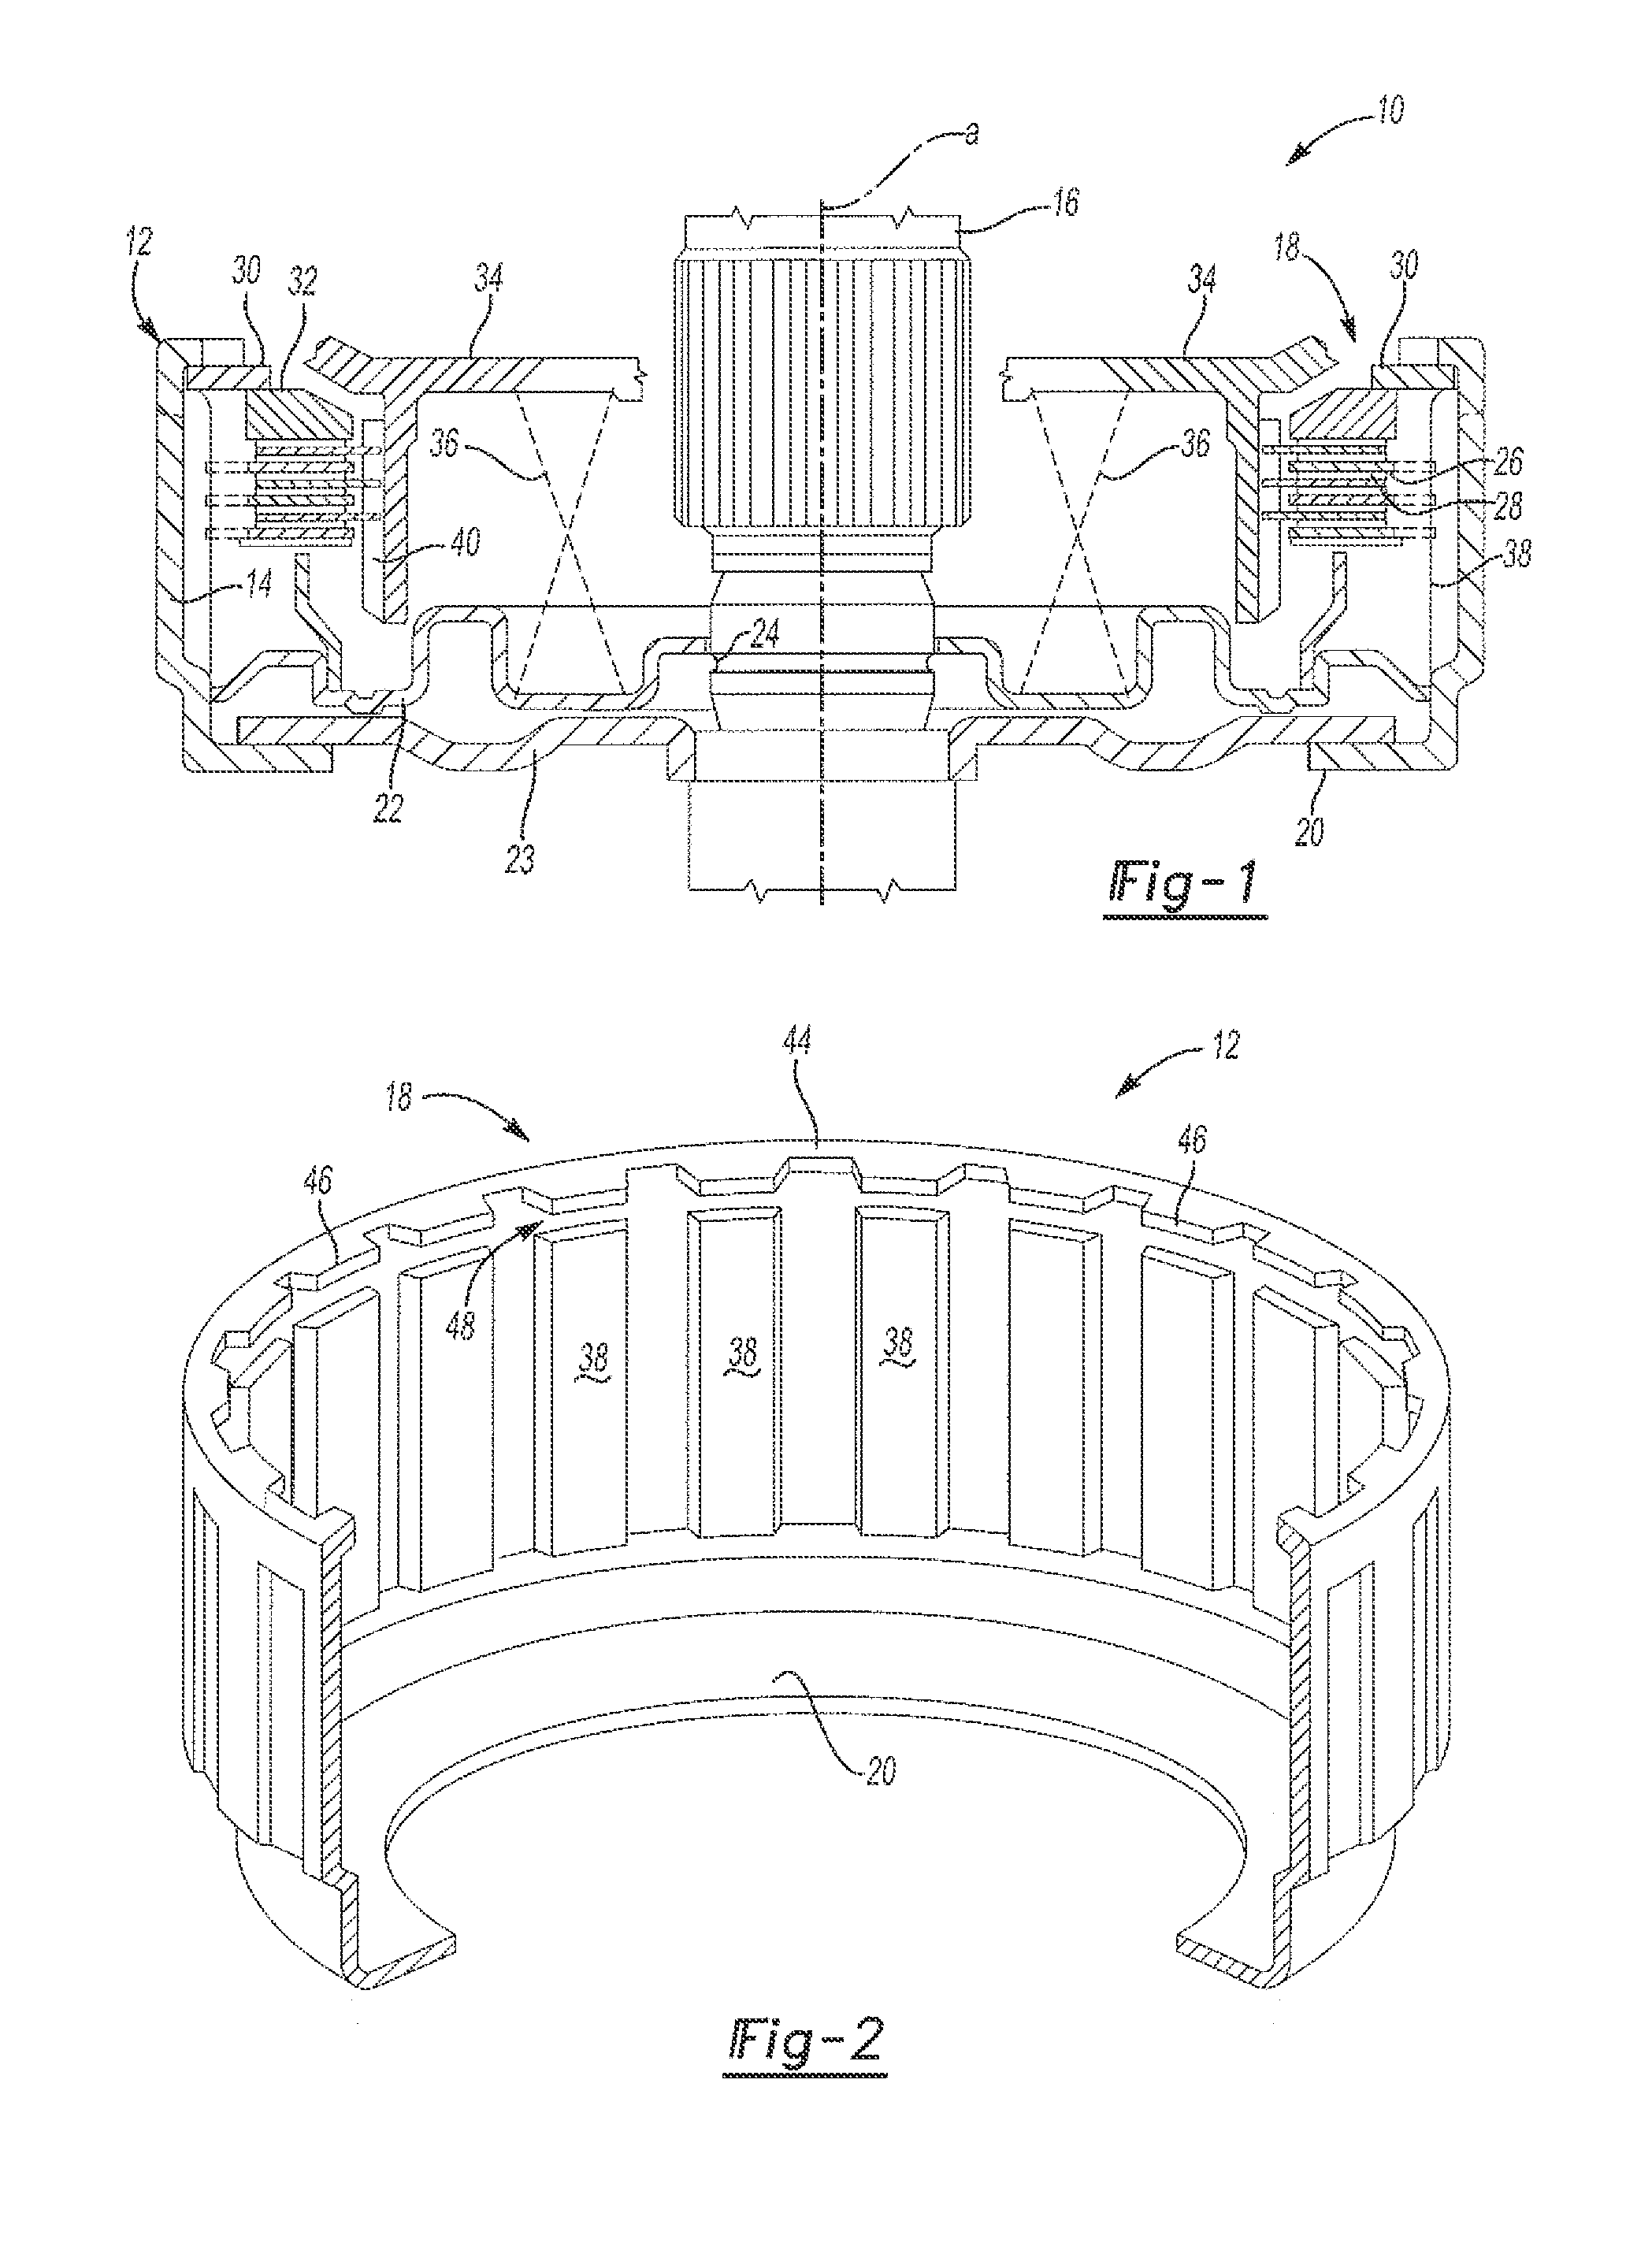 Clutch assembly with formed retention ring